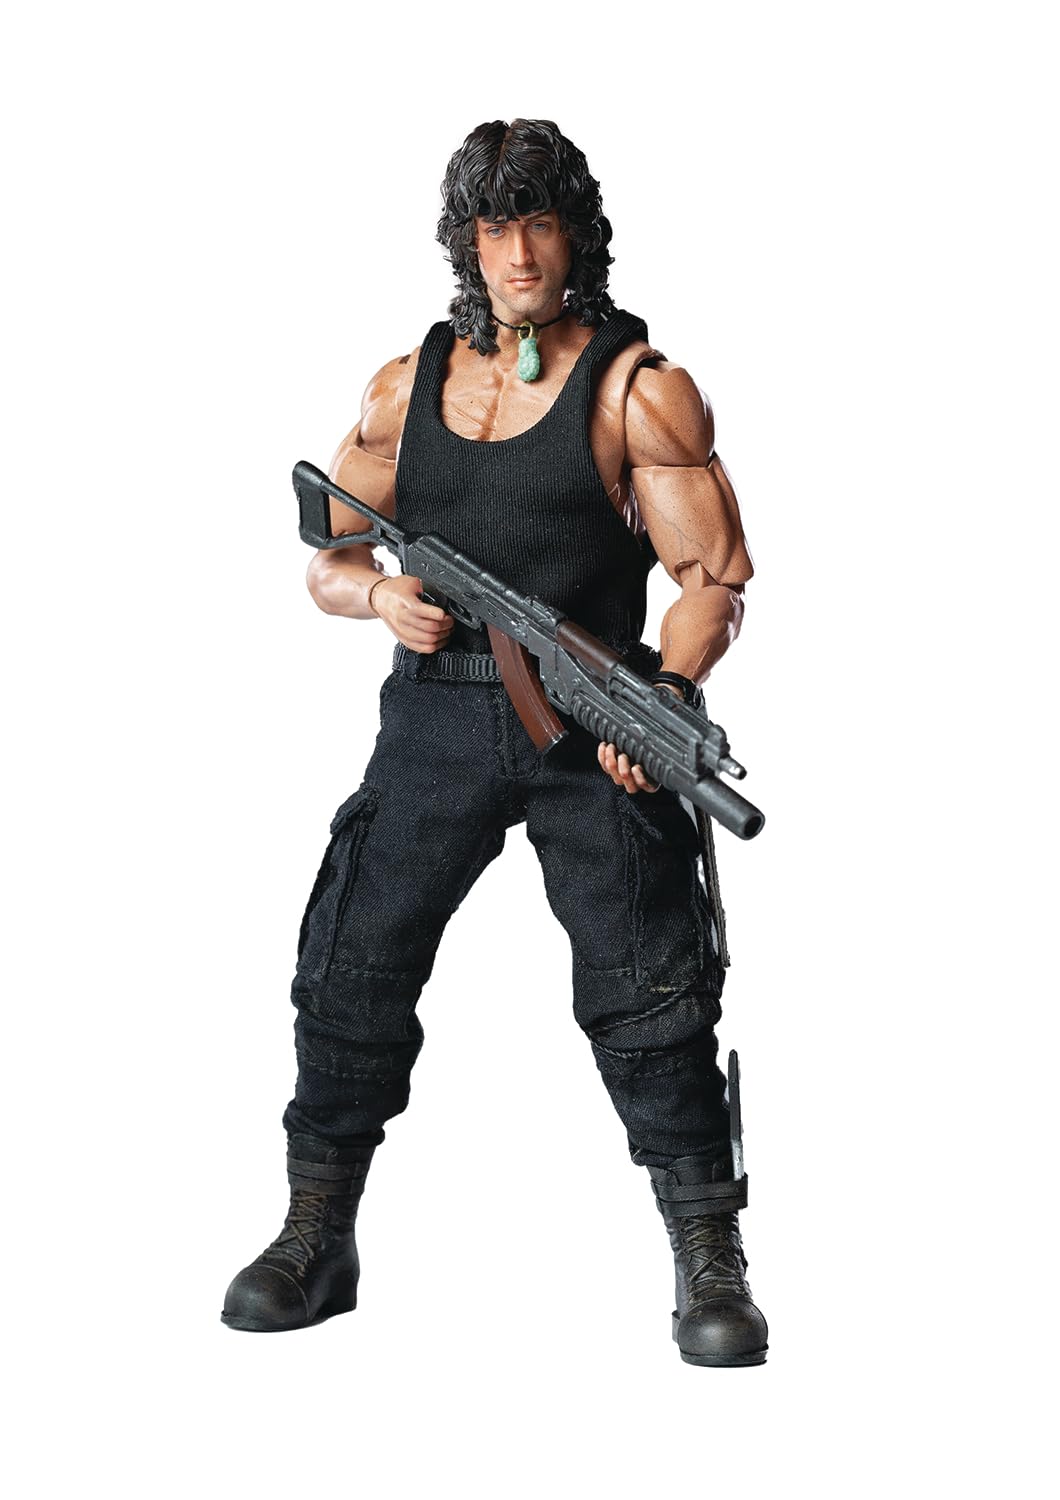 Hiya Toys Rambo: First Blood Part III – Rambo Super Series Previews Exclusive 1:12 Scale Action Figure